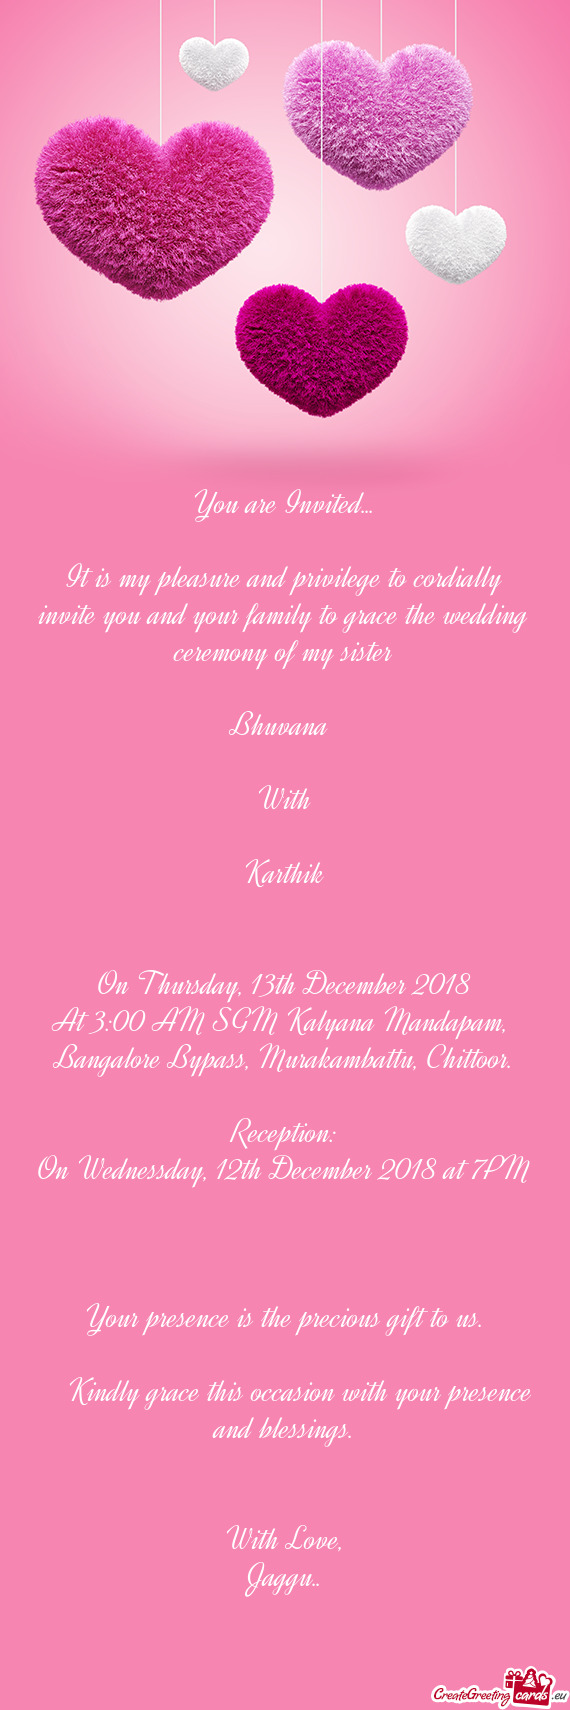 It is my pleasure and privilege to cordially invite you and your family to grace the wedding cer